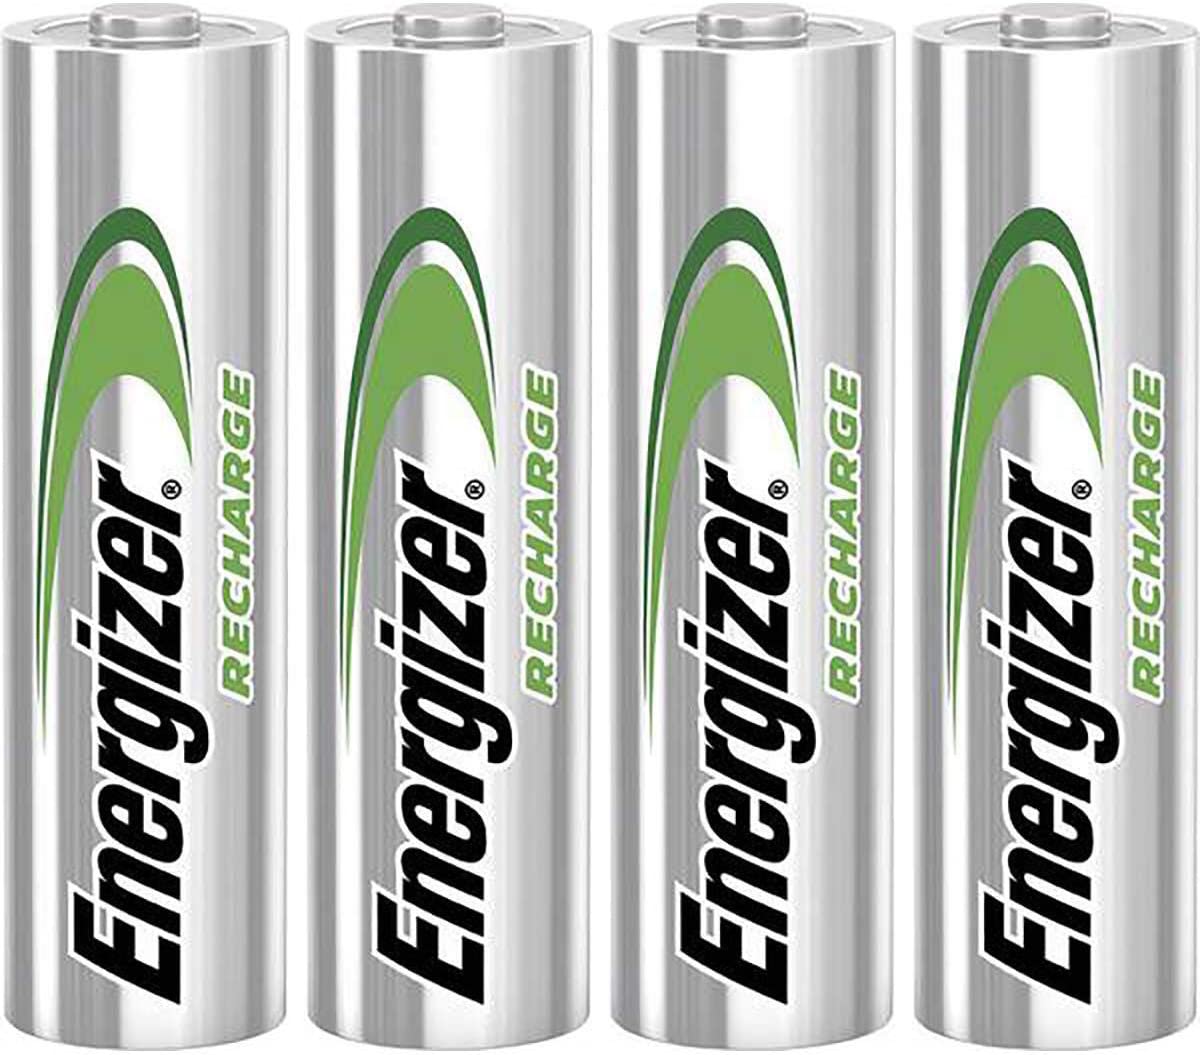 Energizer Rechargeable Extreme Battery AA Pack 4's